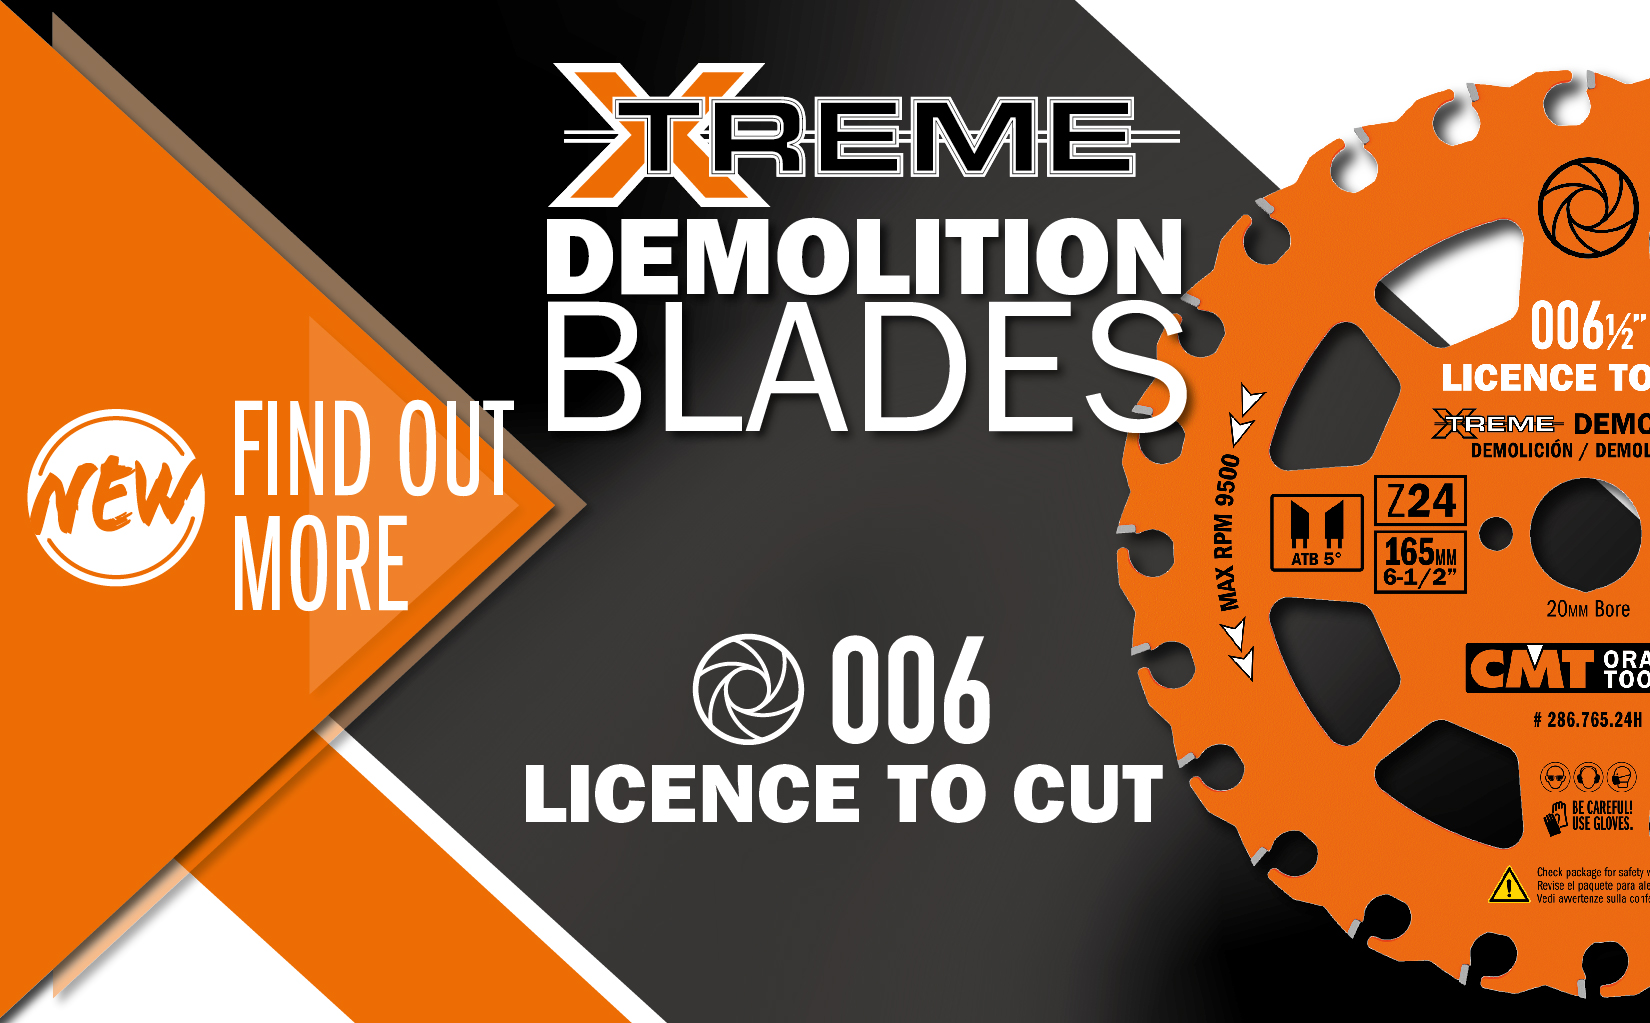 New Xtreme Demolition saw blade for nail-embedded wood cutting